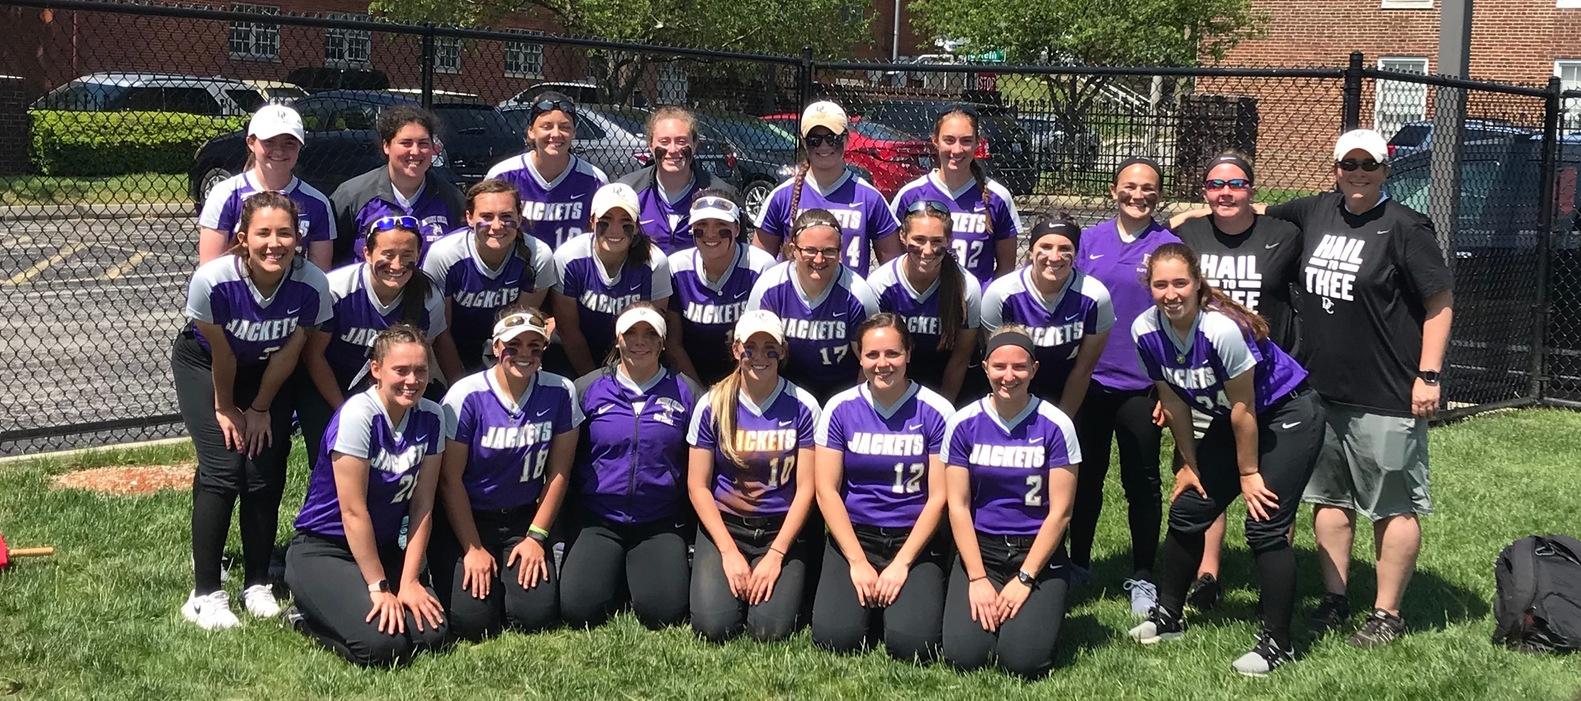 DCSB Ends Post-Season Run in 5-1 Loss to Transy